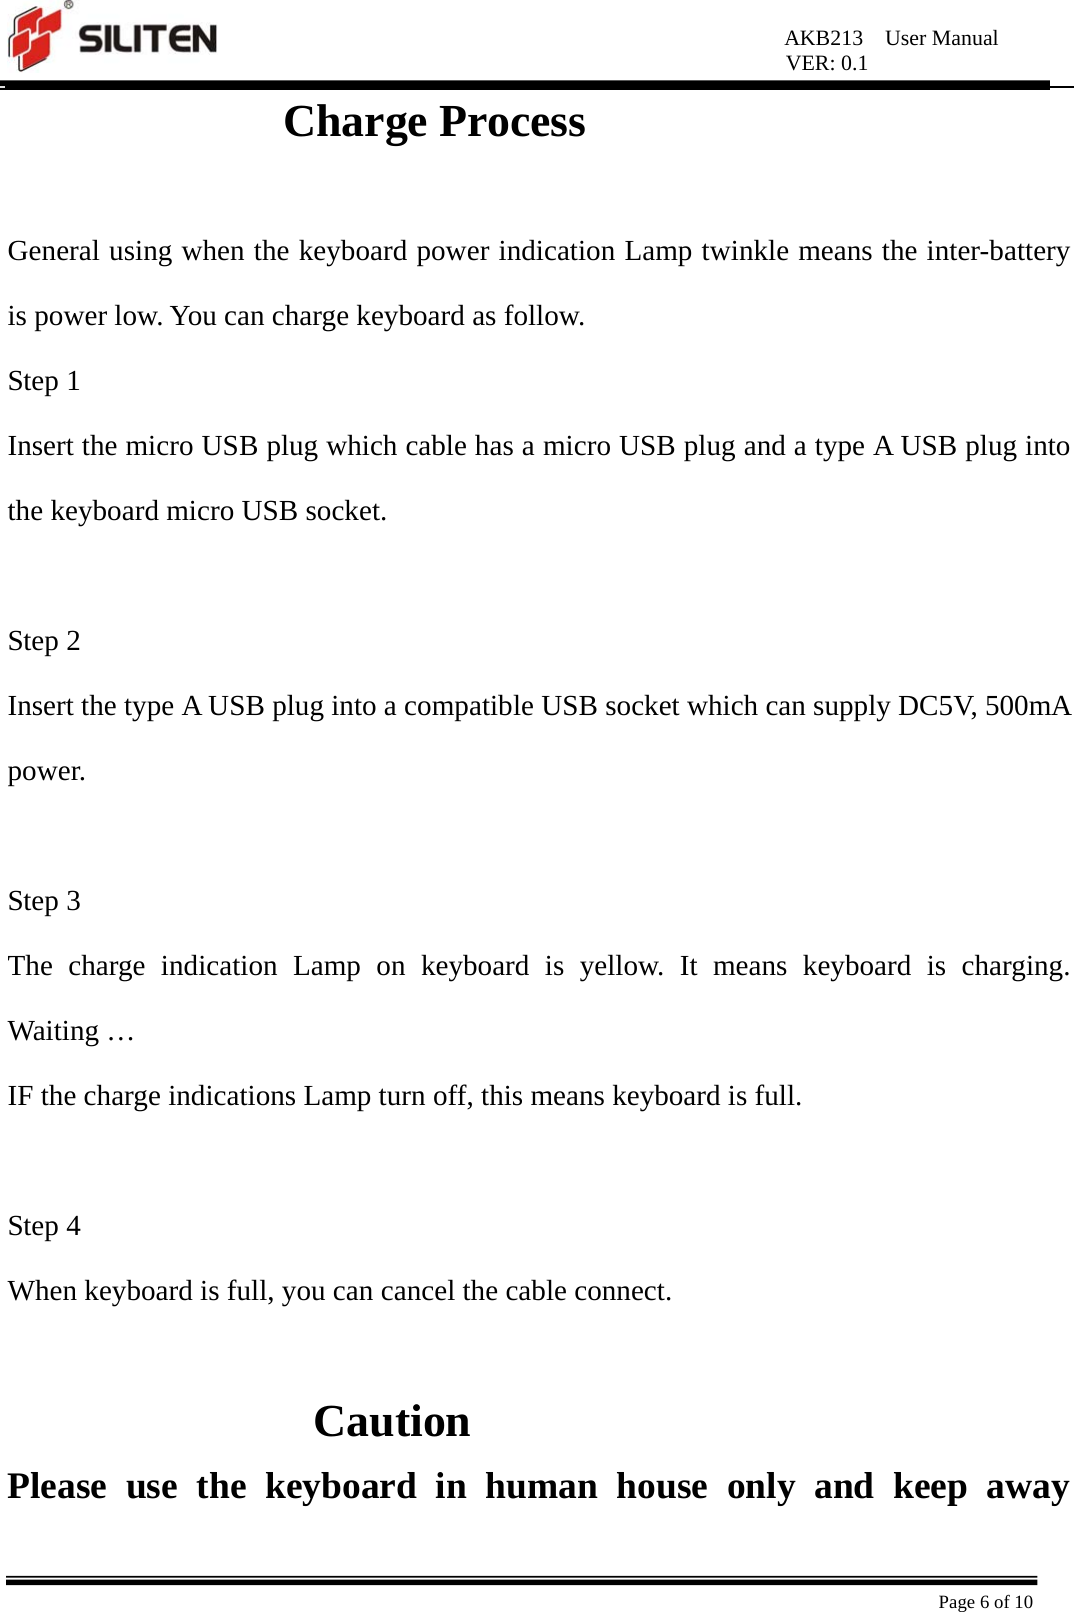 AKB213  User Manual VER: 0.1  Page 6 of 10          Charge Process  General using when the keyboard power indication Lamp twinkle means the inter-battery is power low. You can charge keyboard as follow. Step 1   Insert the micro USB plug which cable has a micro USB plug and a type A USB plug into the keyboard micro USB socket.  Step 2 Insert the type A USB plug into a compatible USB socket which can supply DC5V, 500mA power.  Step 3 The charge indication Lamp on keyboard is yellow. It means keyboard is charging. Waiting …   IF the charge indications Lamp turn off, this means keyboard is full.    Step 4 When keyboard is full, you can cancel the cable connect.  Caution Please use the keyboard in human house only and keep away 